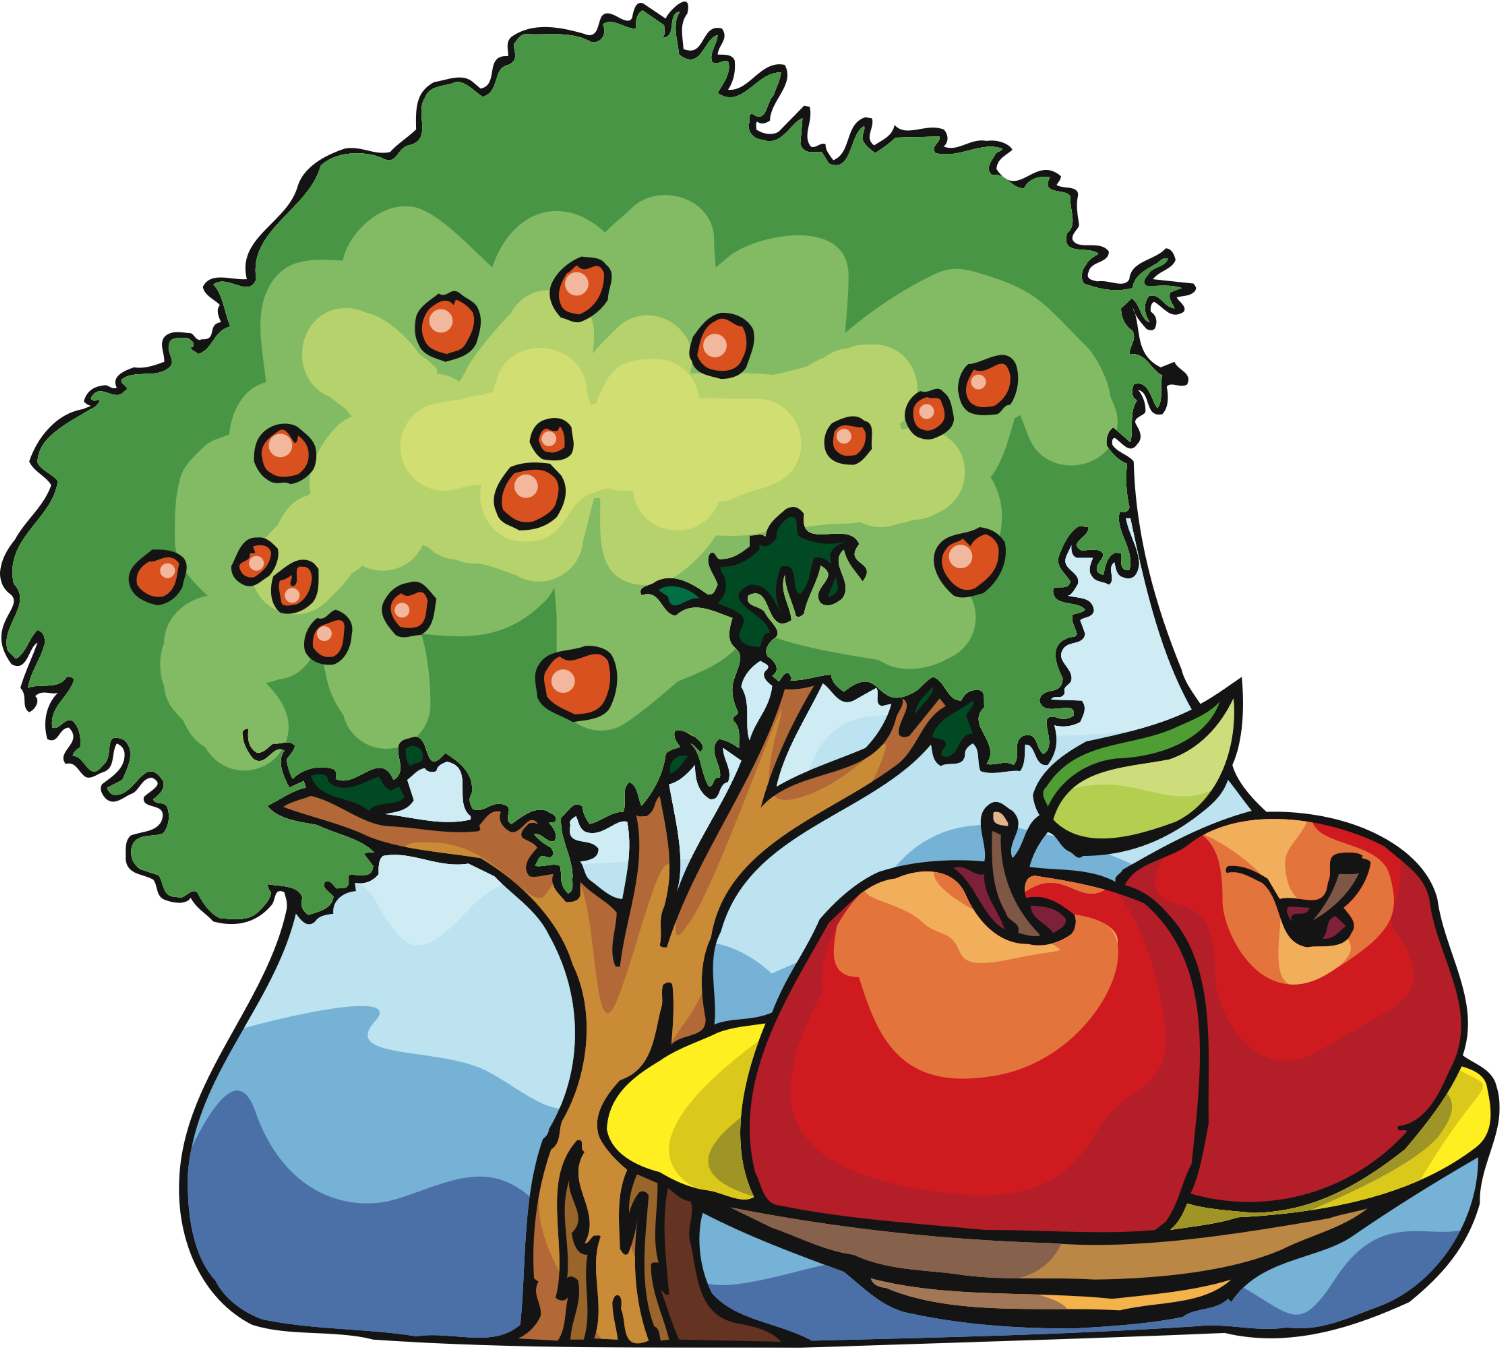 Johnny Appleseed Day #JohnnyAppleseedDay - History and infor ...